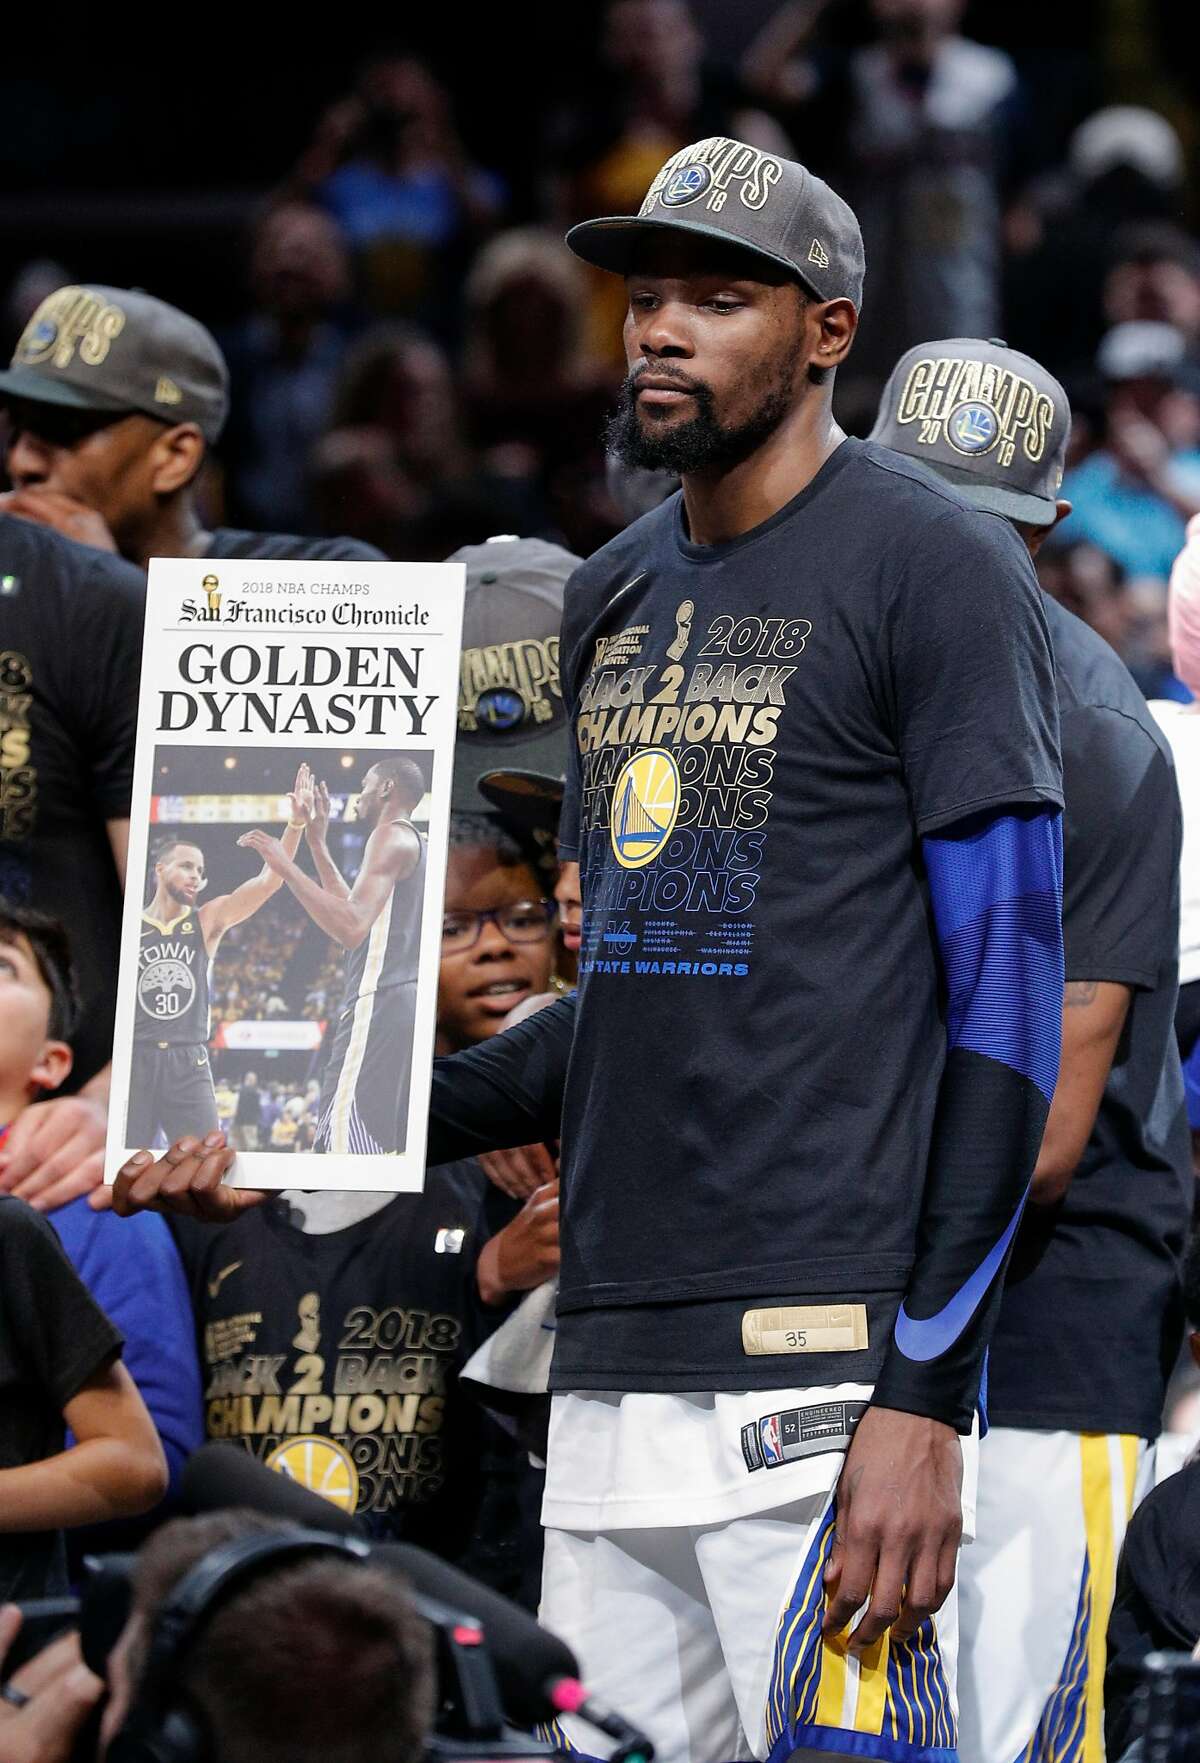 The Golden State Warriors' Kevin Durant holds up a Chronicle front page after their 108 to 85 victory over the Cleveland Cavaliers in game 4 of The NBA Finals between the Golden State Warriors and the Cleveland Cavaliers at Oracle Arena on Friday, June 8, 2018 in Cleveland, Ohio.